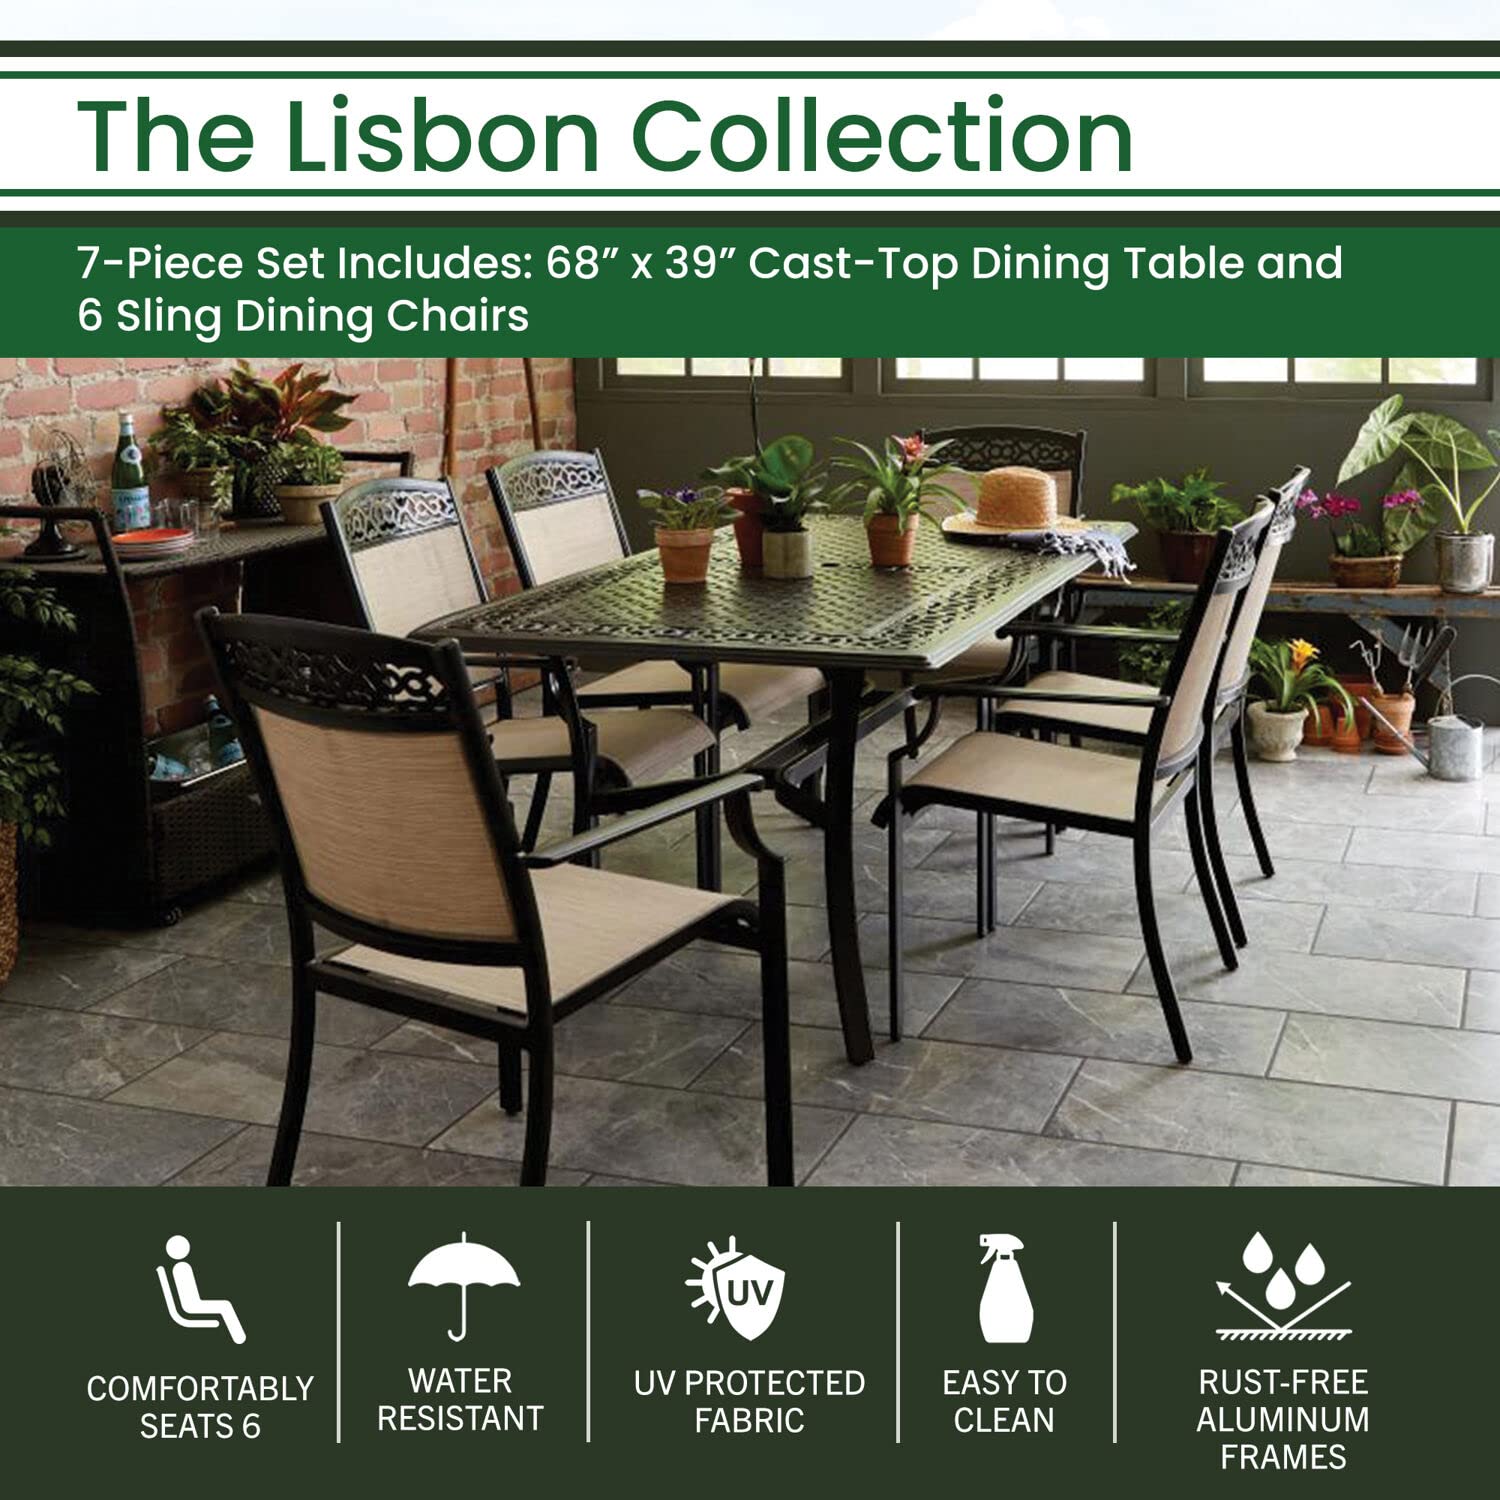 Hanover 6 Sling Stationary Chairs and 39 in. x 68 in. Cast-Top Table in Tan Lisbon 7-Piece Outdoor Dining Set